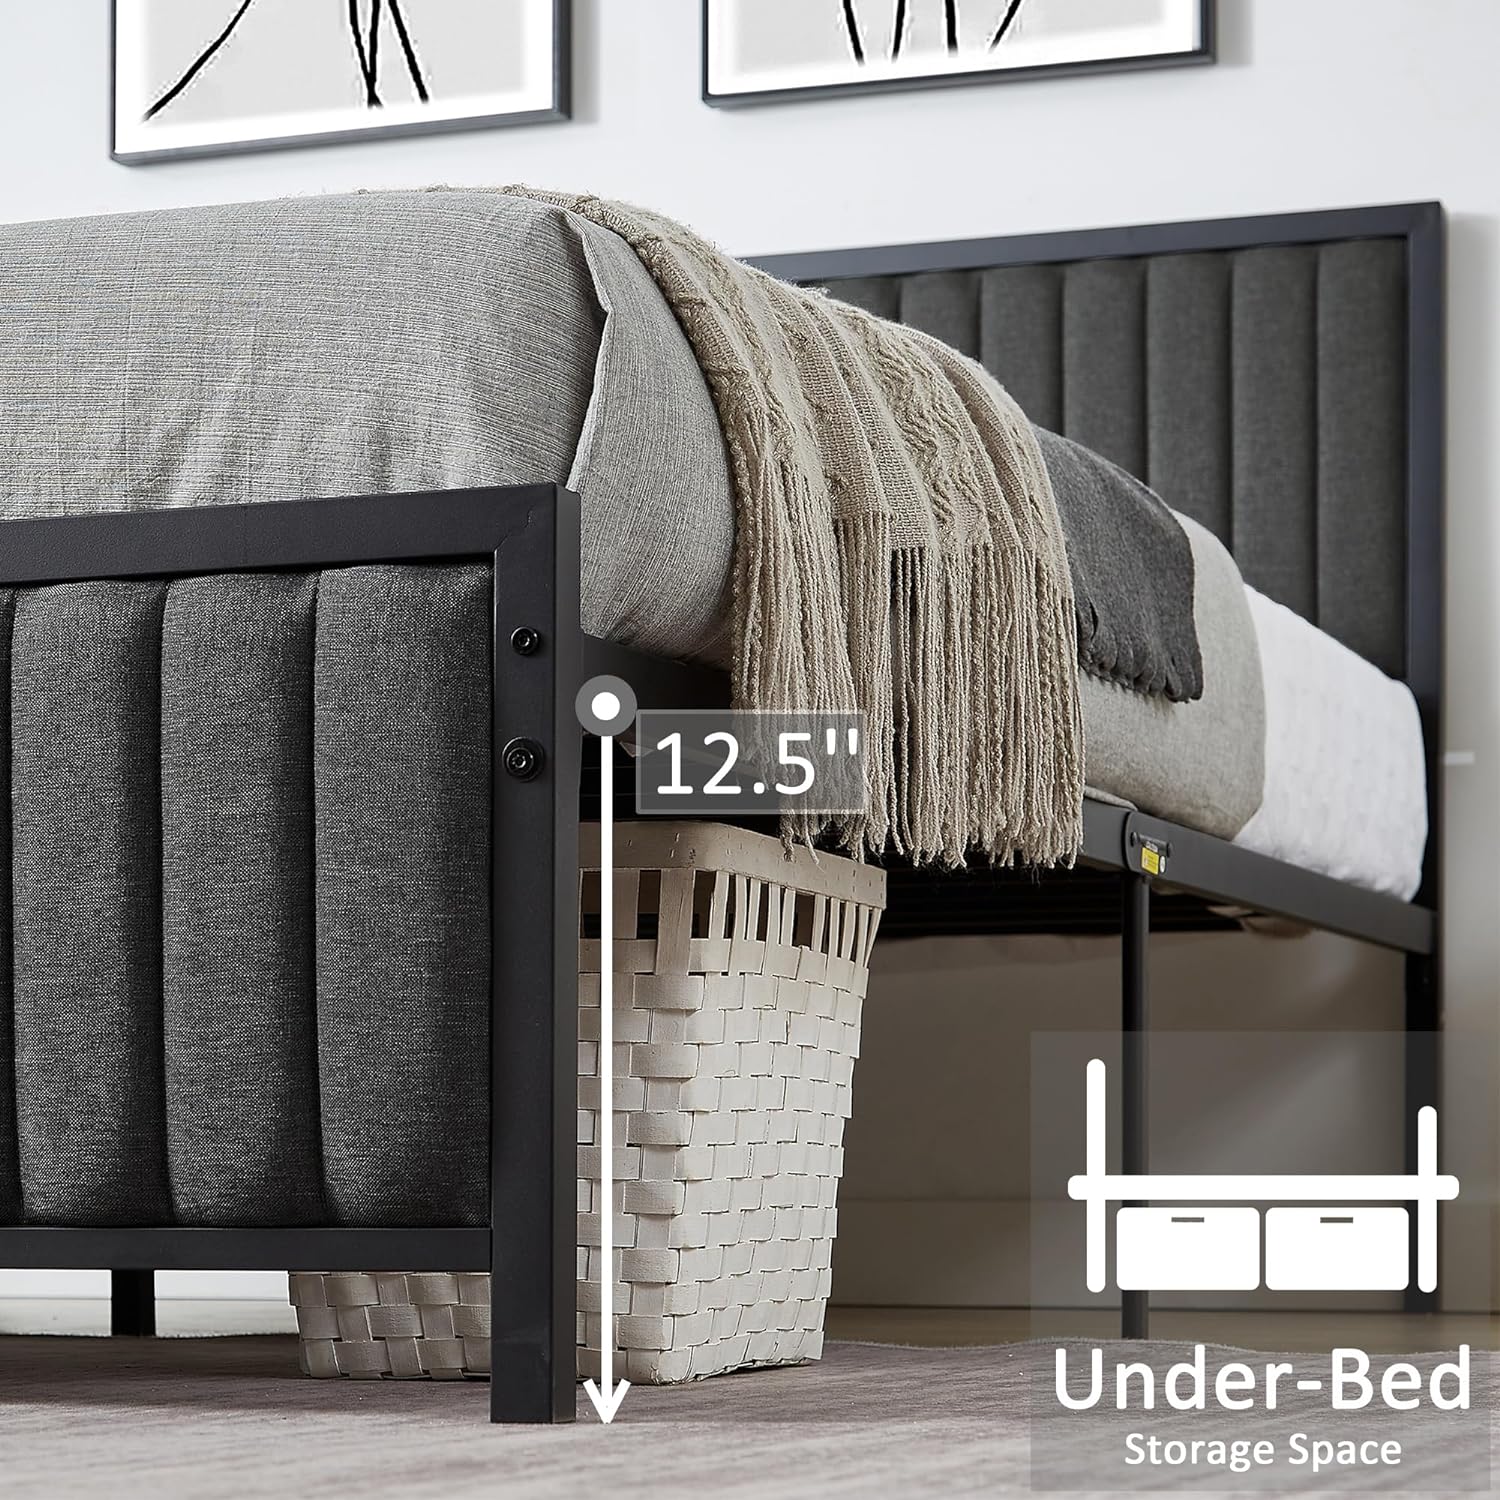 Bed Frame with Upholstered Tufted Headboard & Footboard